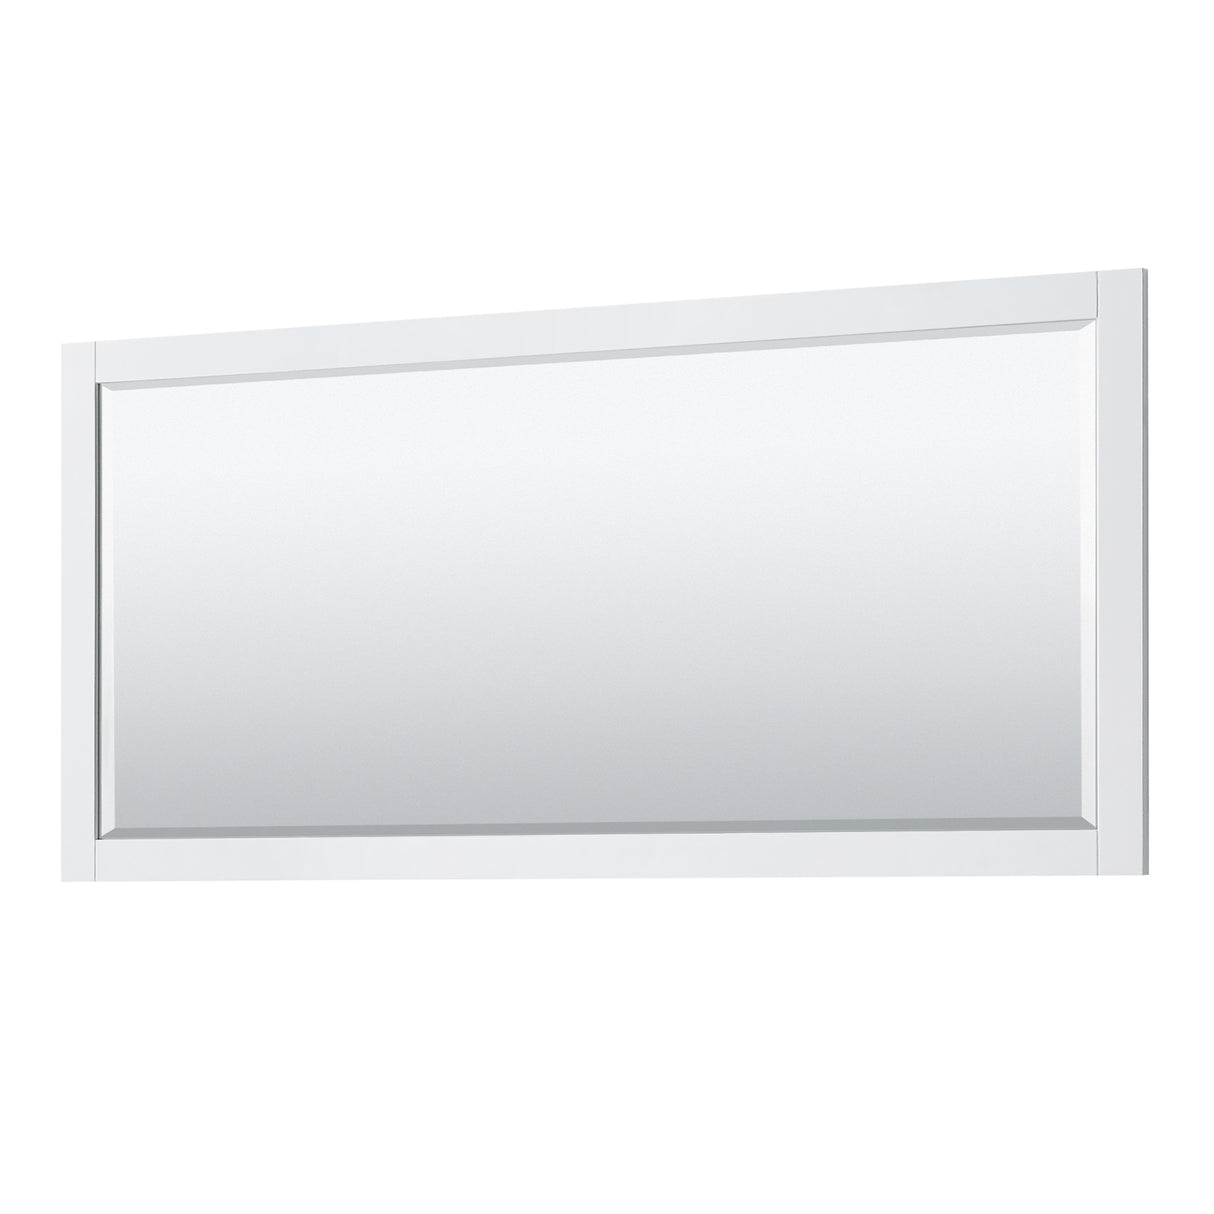 Avery 80 Inch Double Bathroom Vanity in White White Cultured Marble Countertop Undermount Square Sinks 70 Inch Mirror